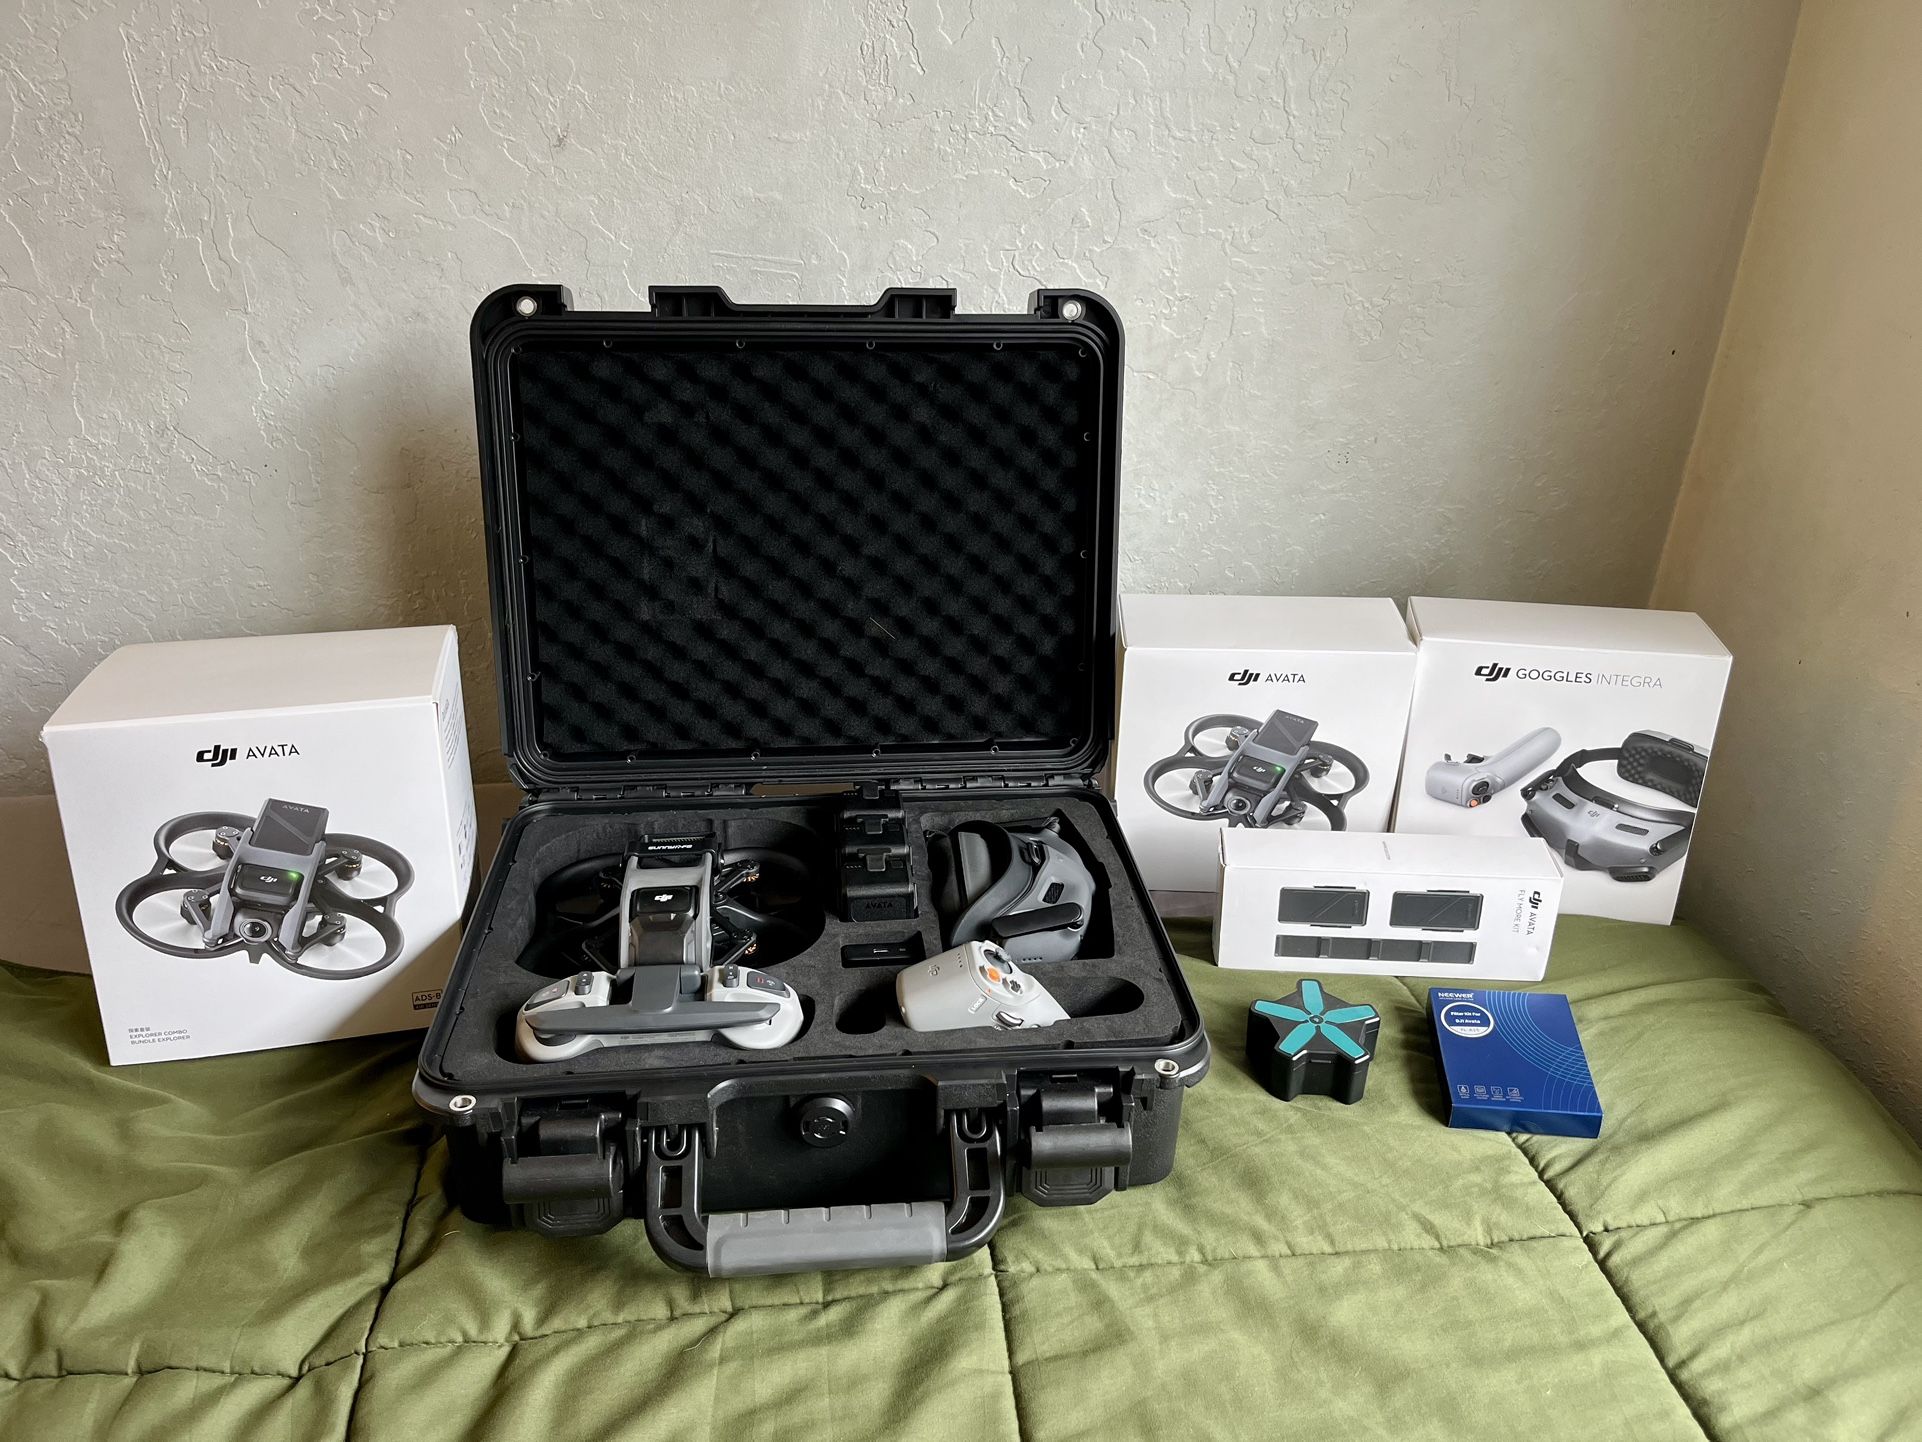 DJI Avata W/ Fly More Kit and FPV Remote Controller 2 + DJI Care Refresh + Extras! TAKING OFFERS!